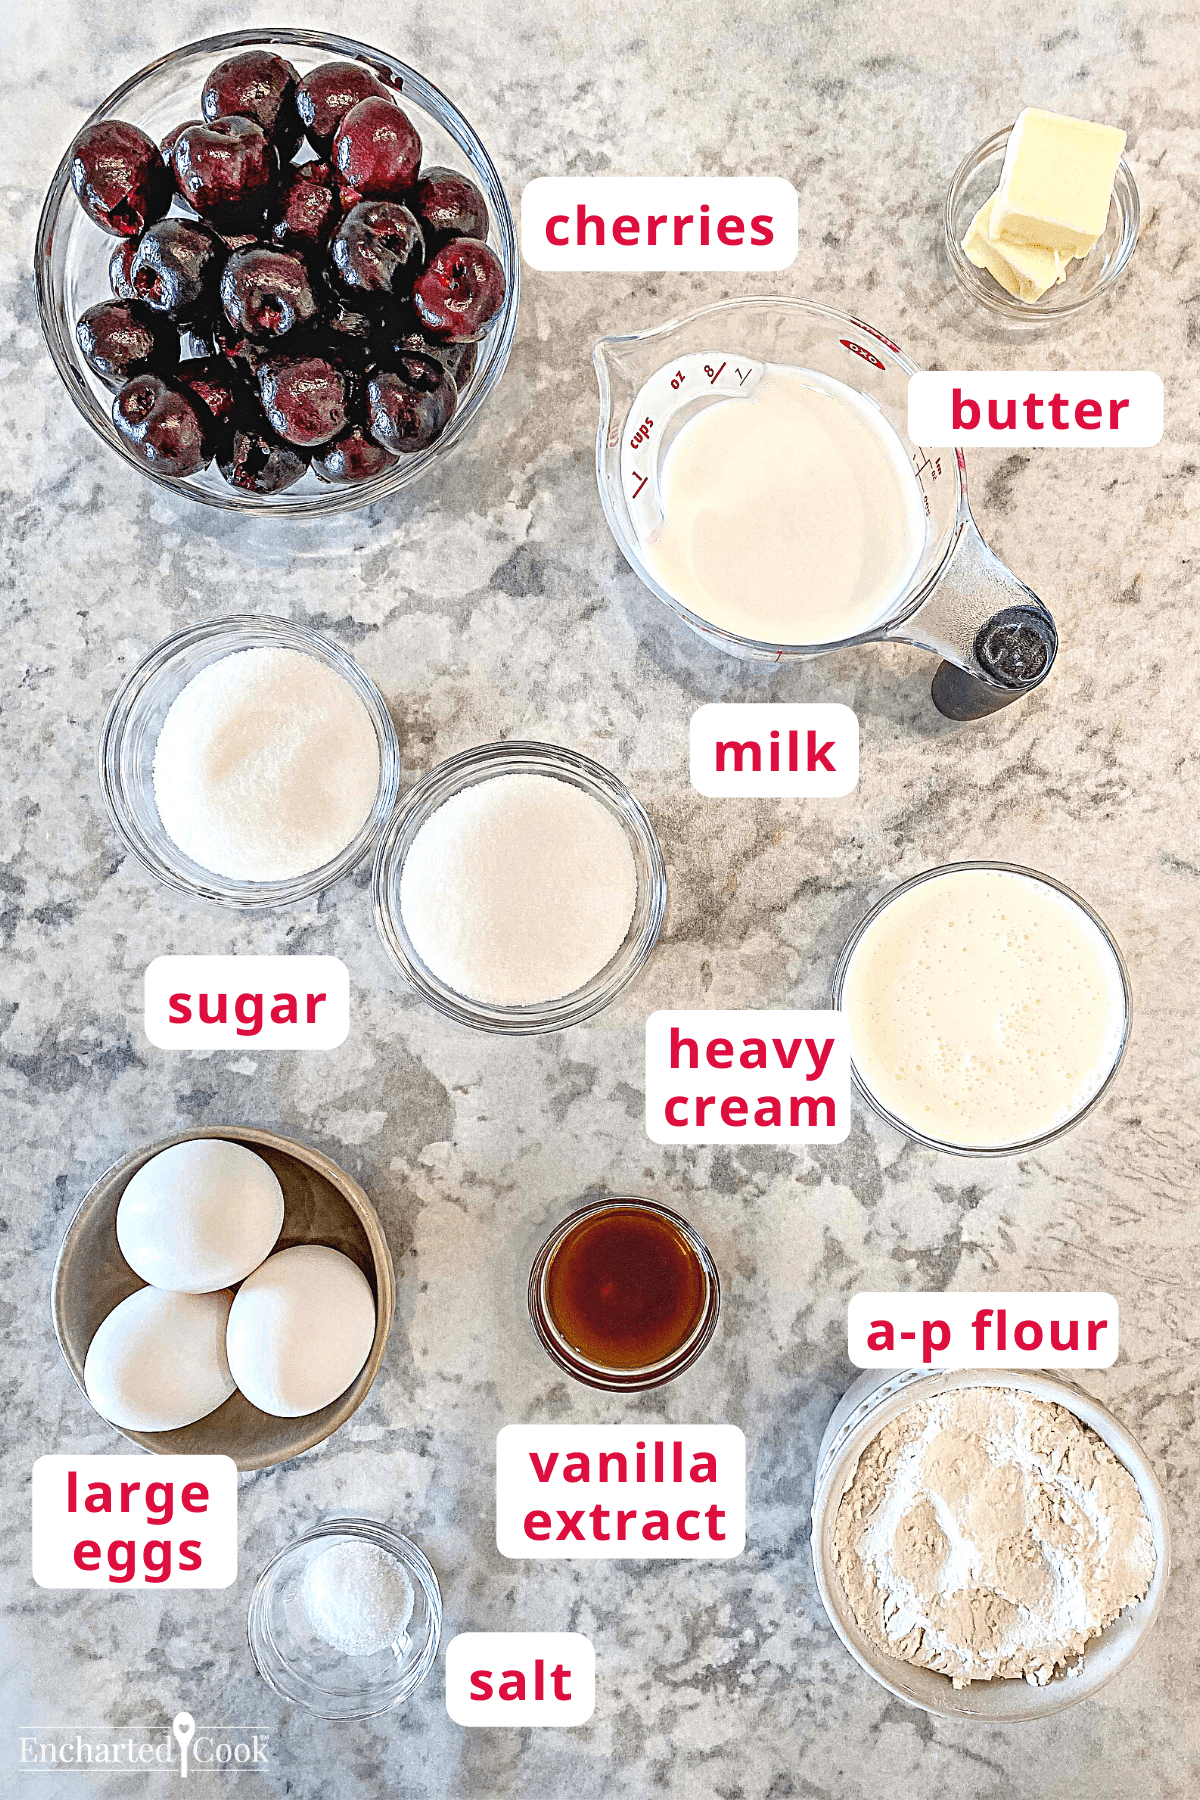 Ingredients clockwise from top: cherries, butter, milk, heavy cream, a-p flour, vanilla extract, salt, large eggs, and sugar.